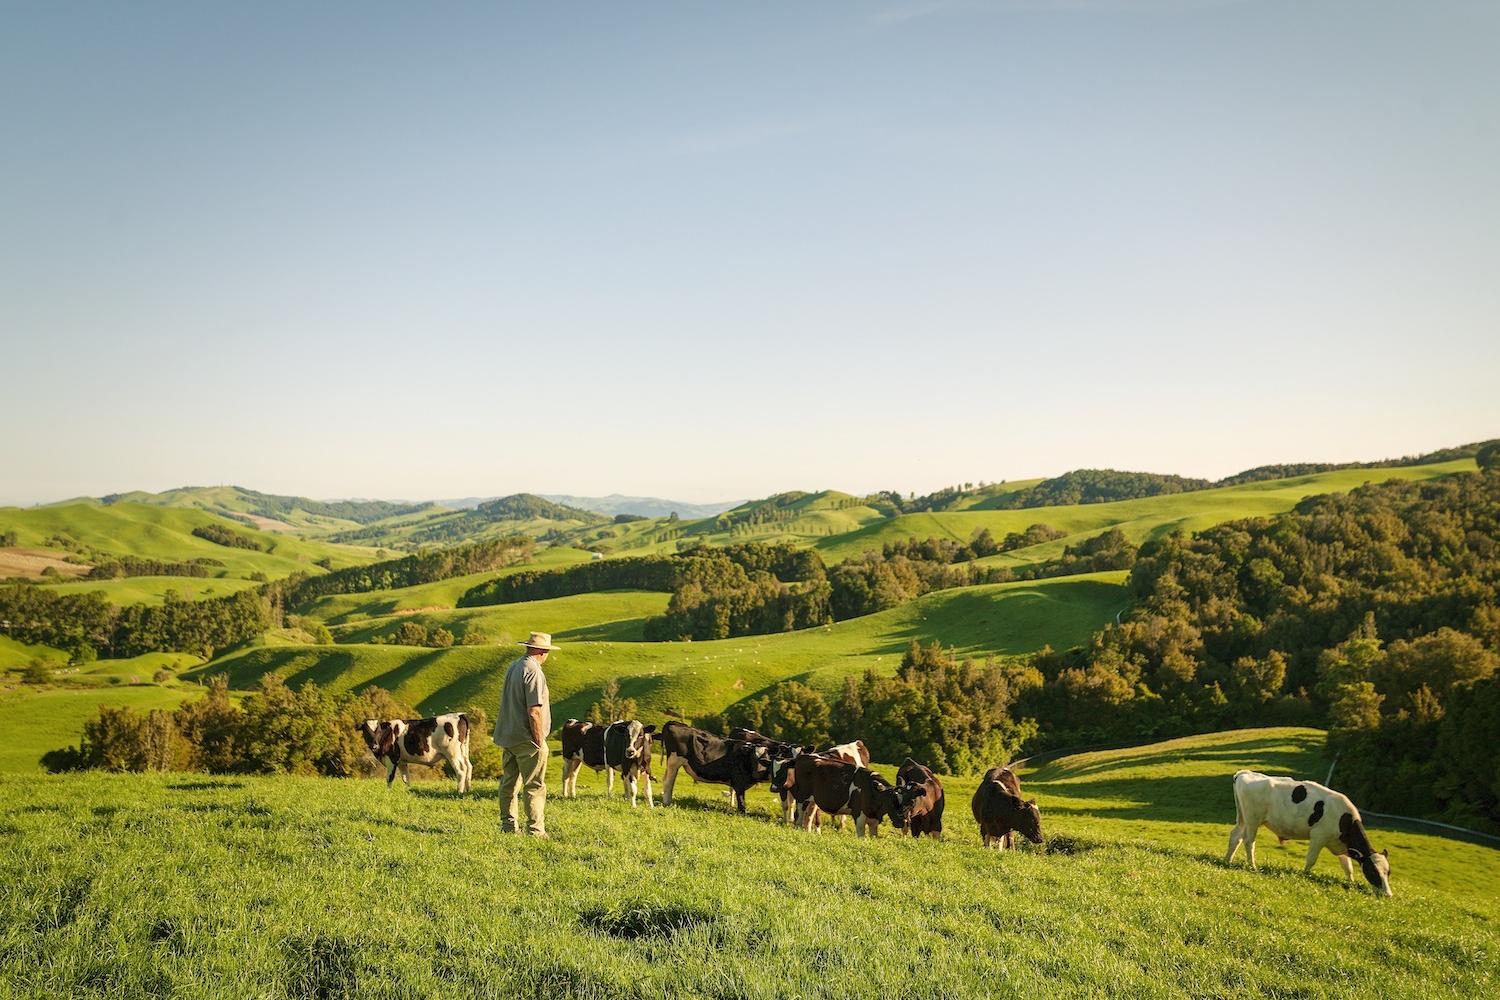 Farmer looks as cows graze in the pasture in New Zealand with green hills and blue sky in the background - animal welfare